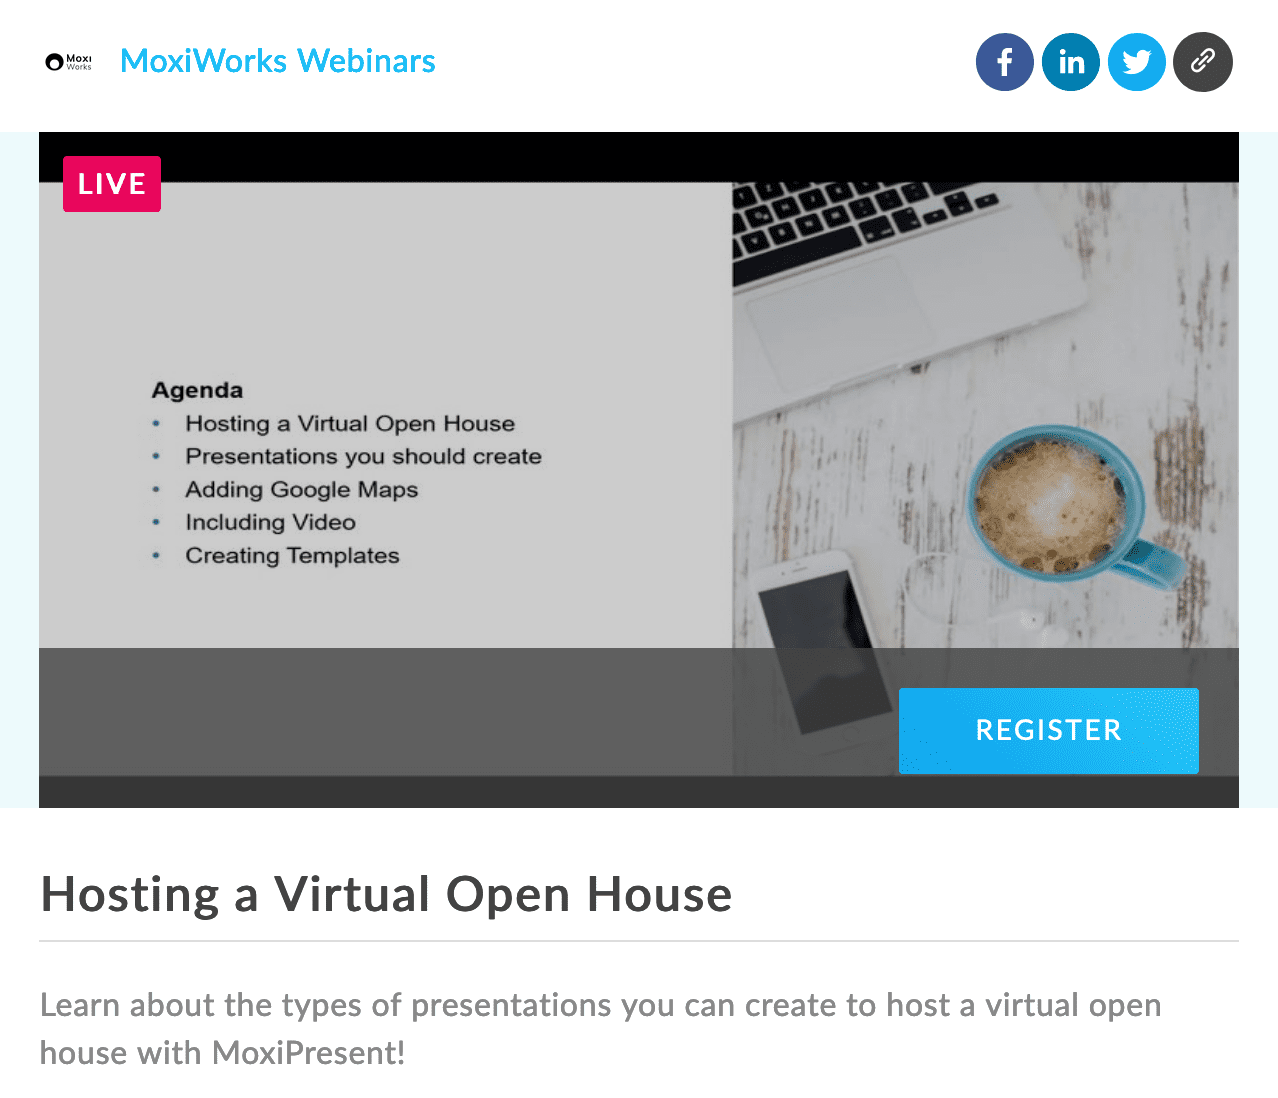 Hosting a virtual open house with MoxiPresent